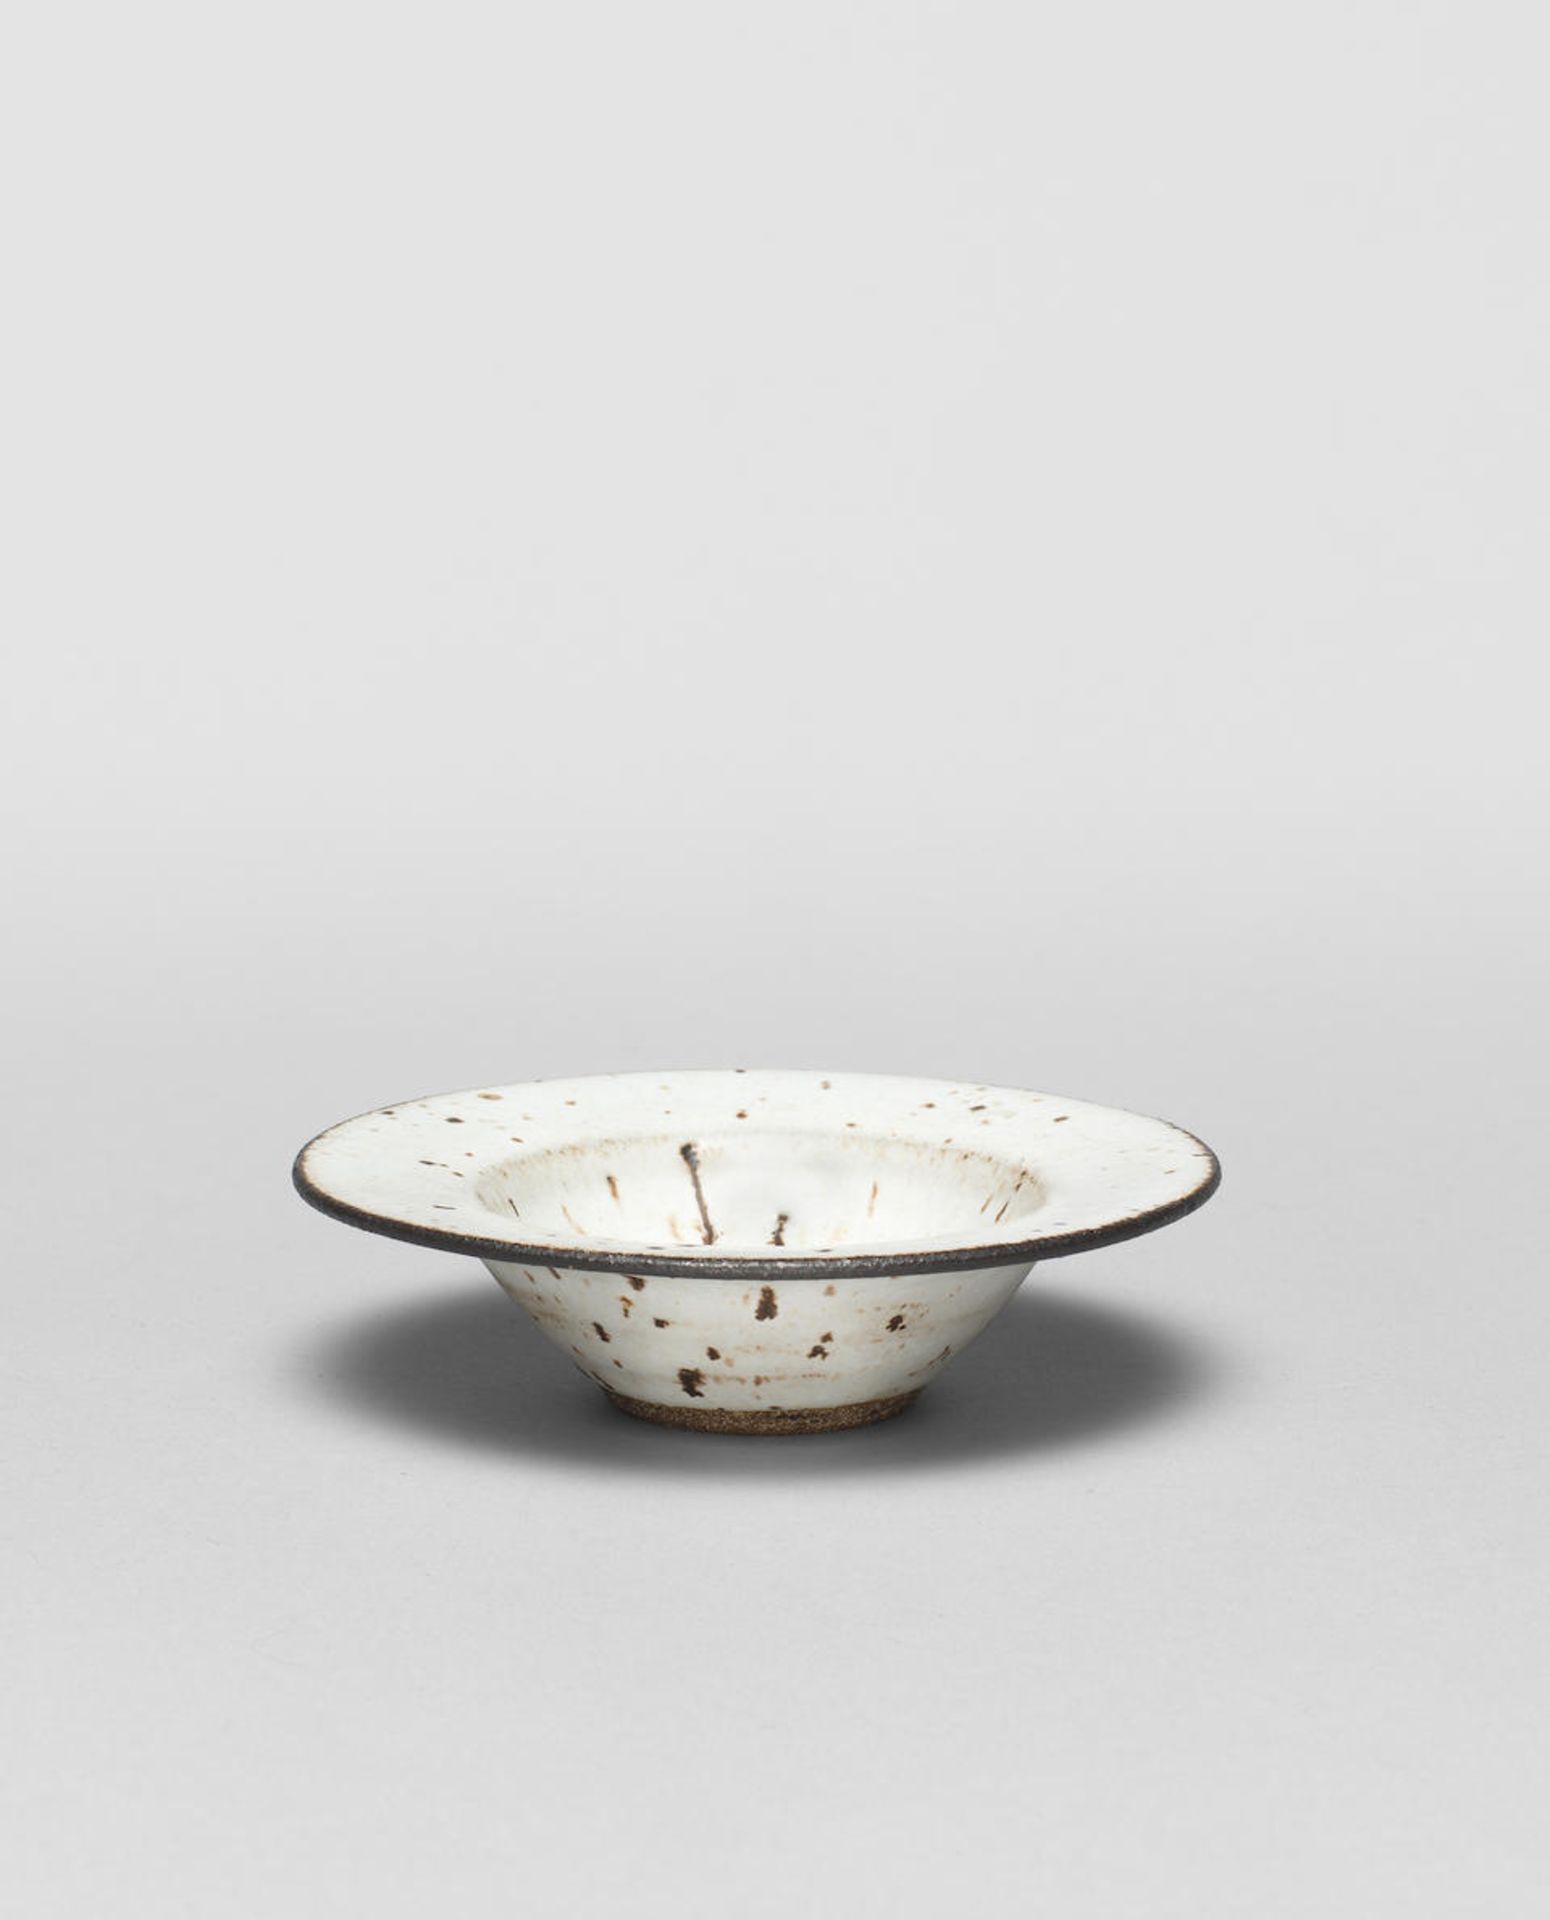 Lucie Rie Ashtray, circa 1960 - Image 2 of 2